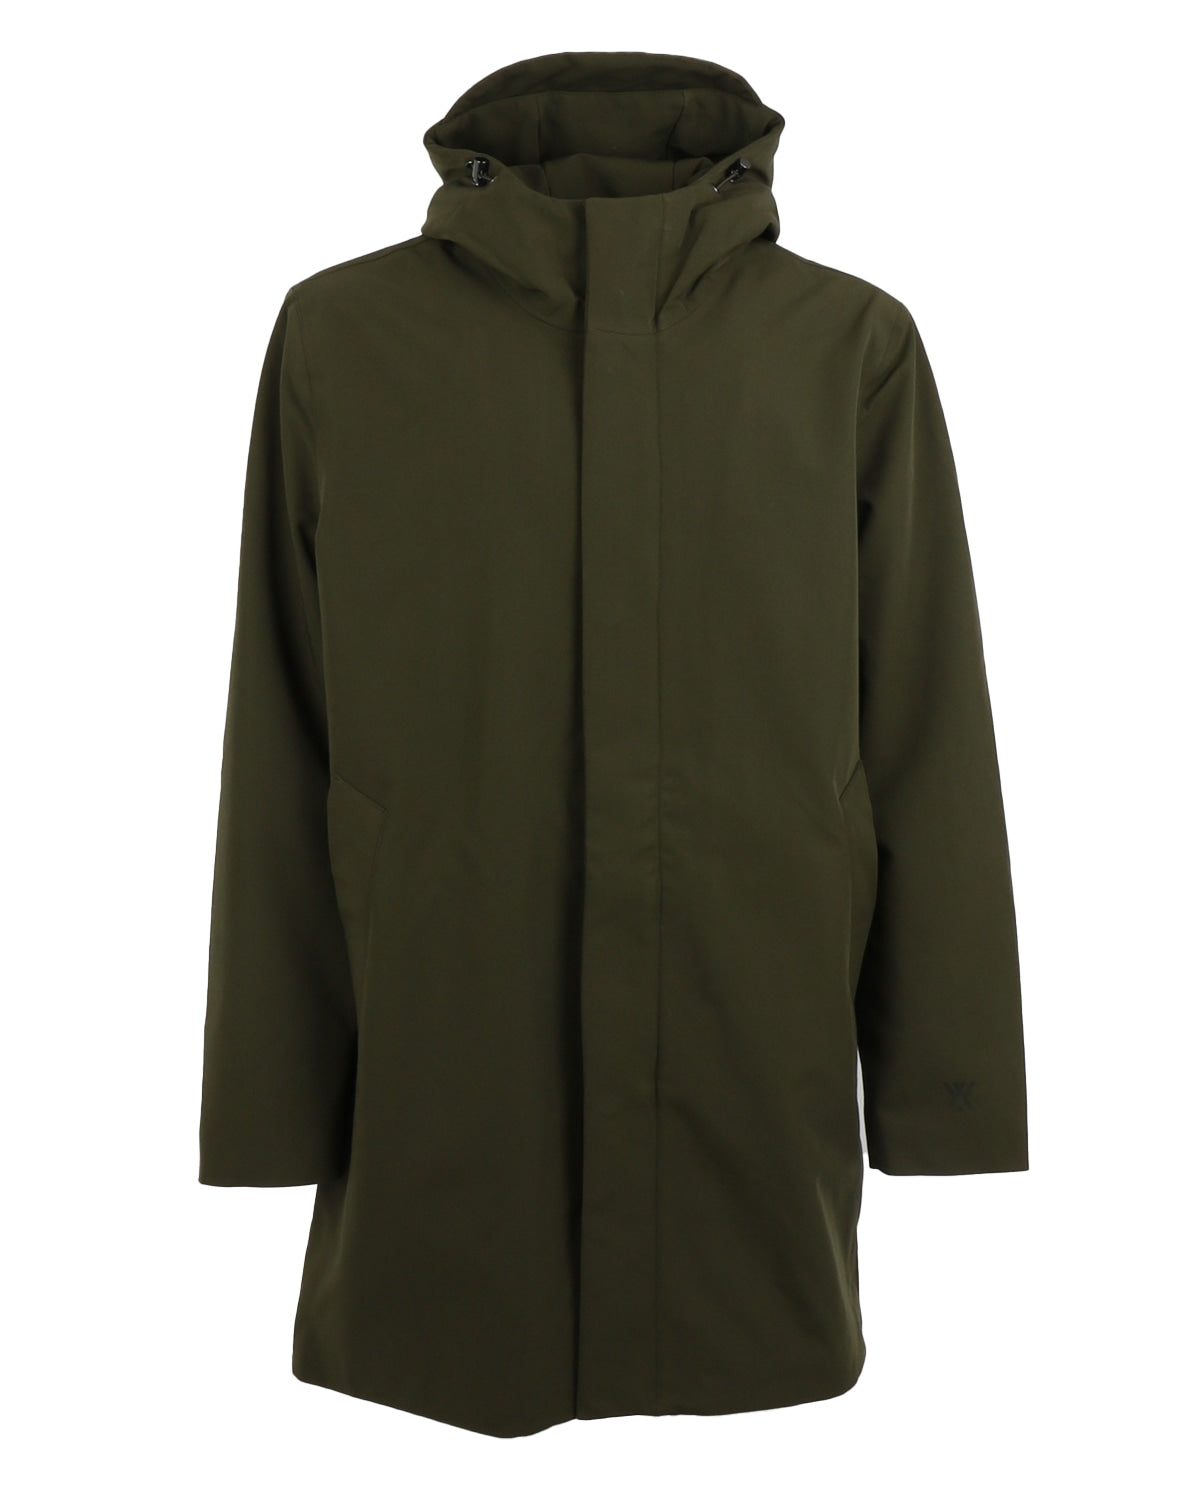 welter shelter_terror weather parka_deep army_1_5